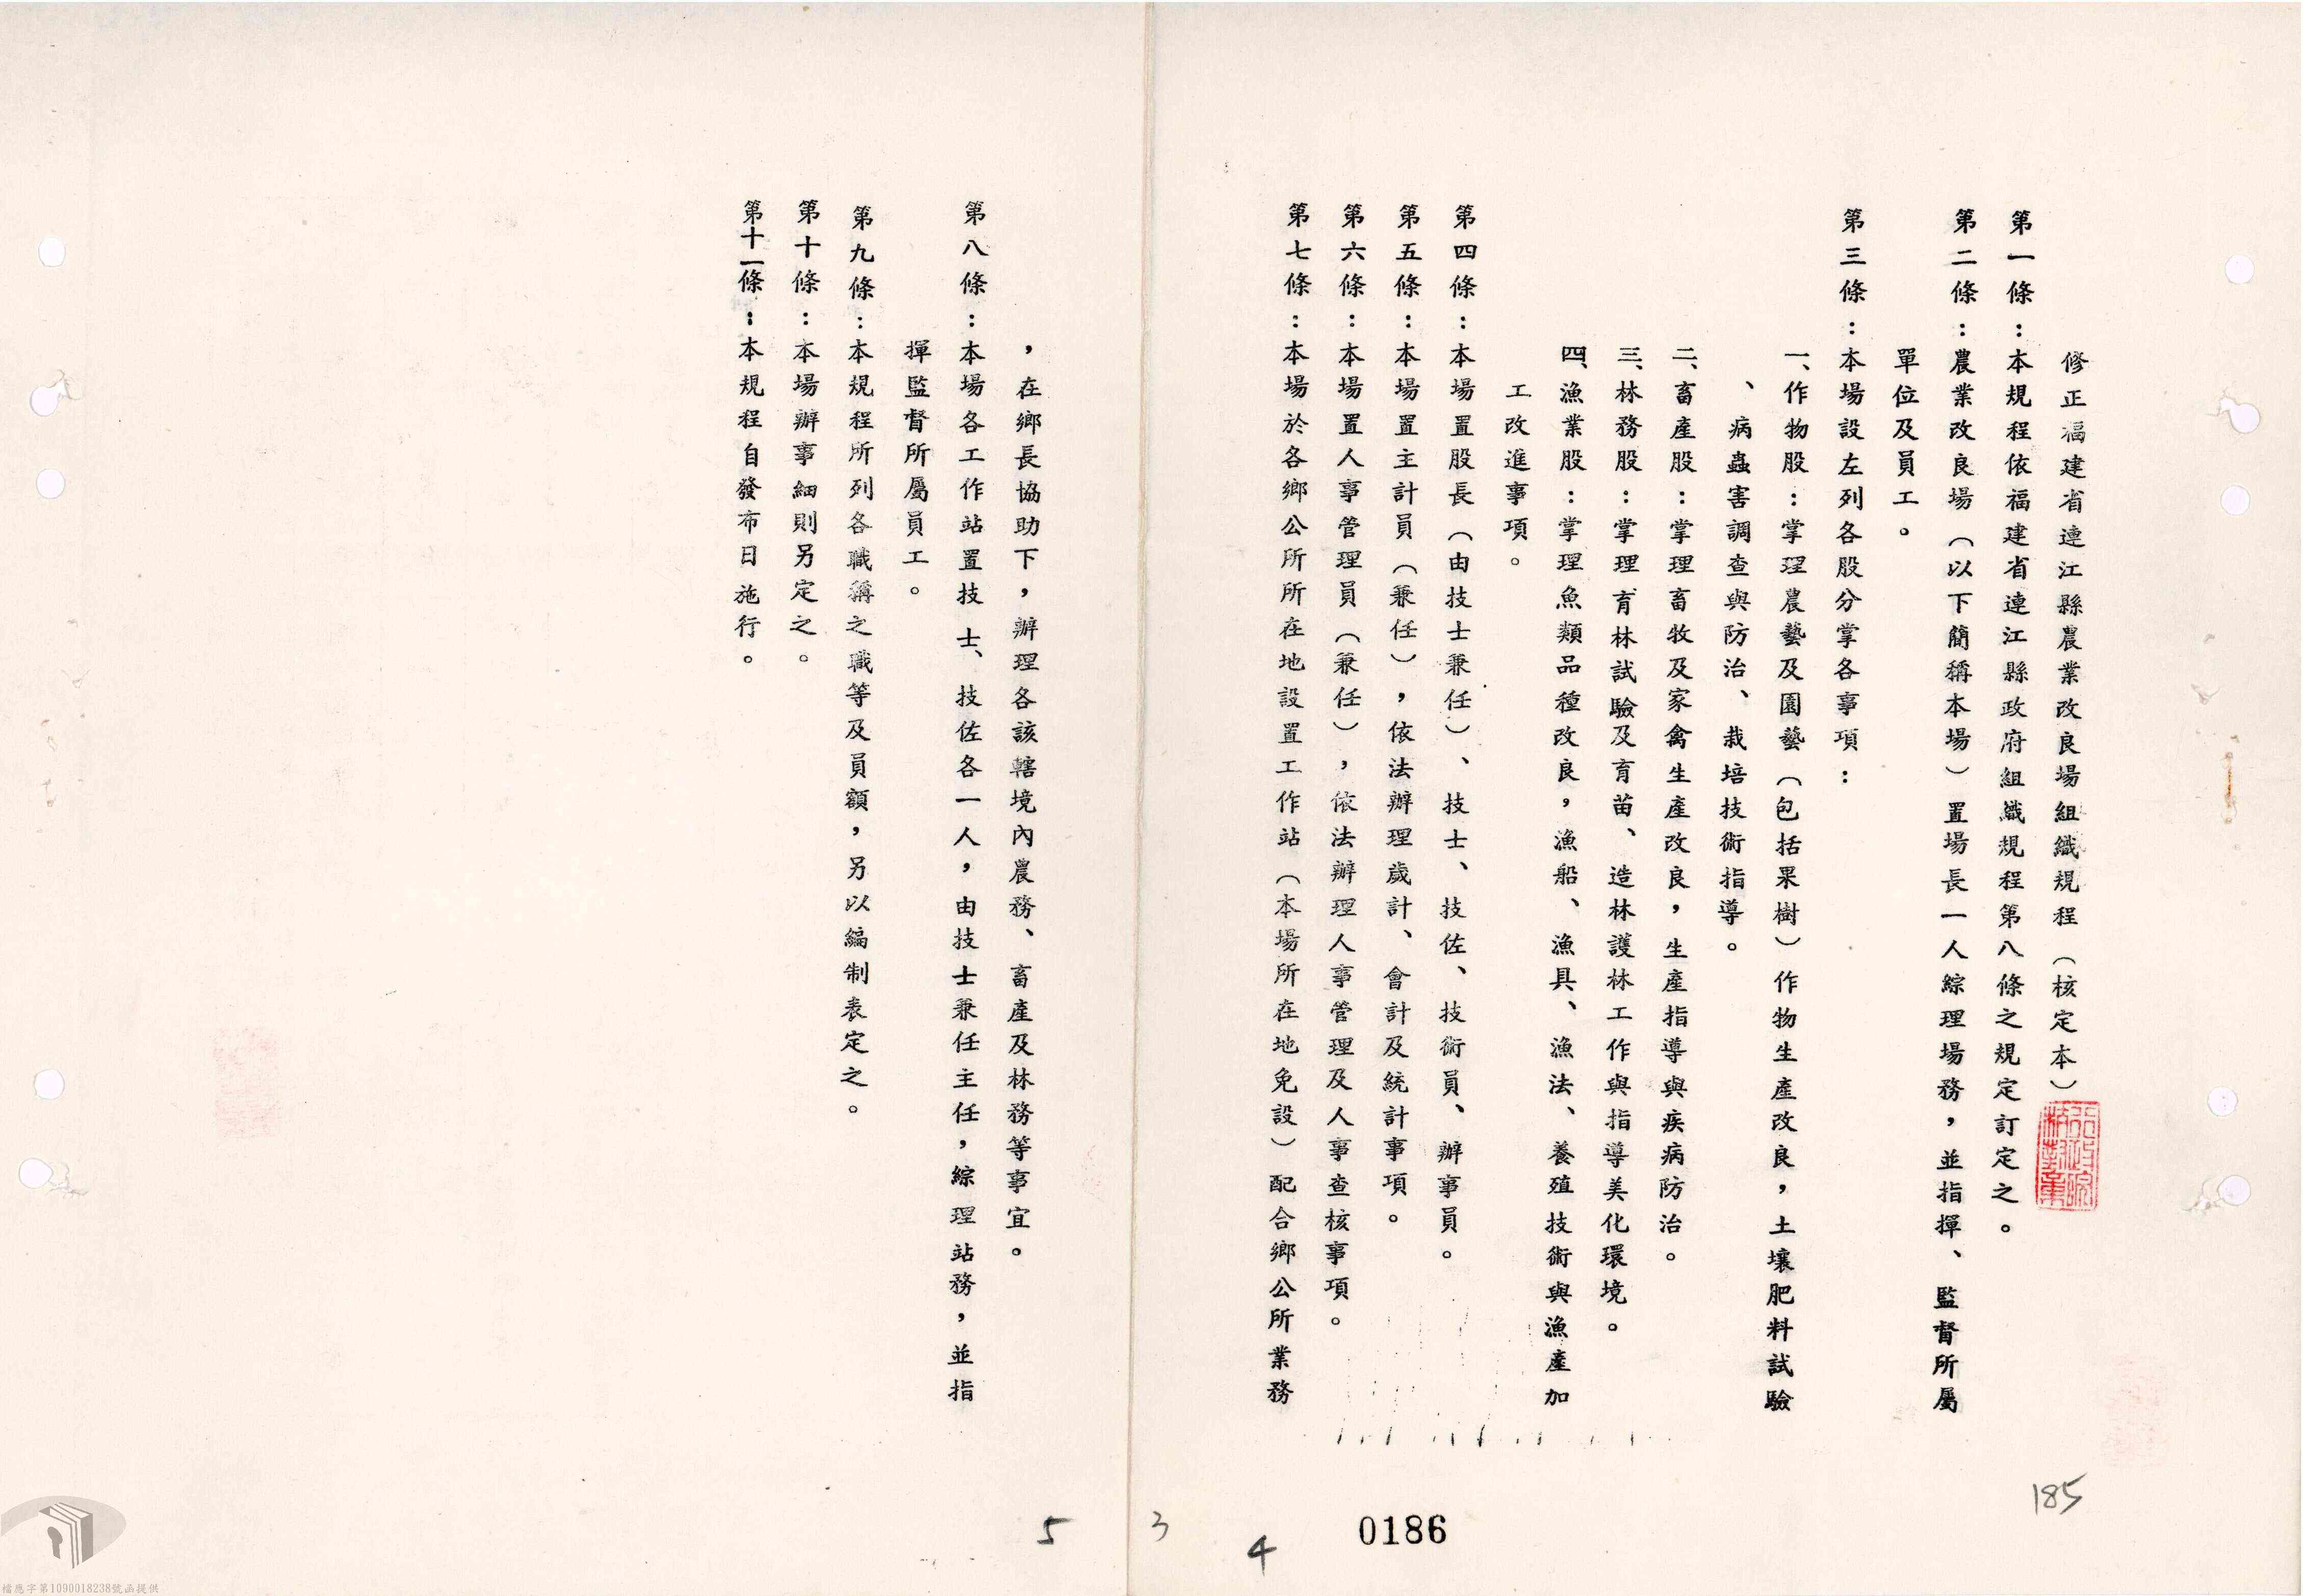 August 1977, Organizational Regulations of the Lienchiang County Agricultural Research and Extension Station during the period of military administration.